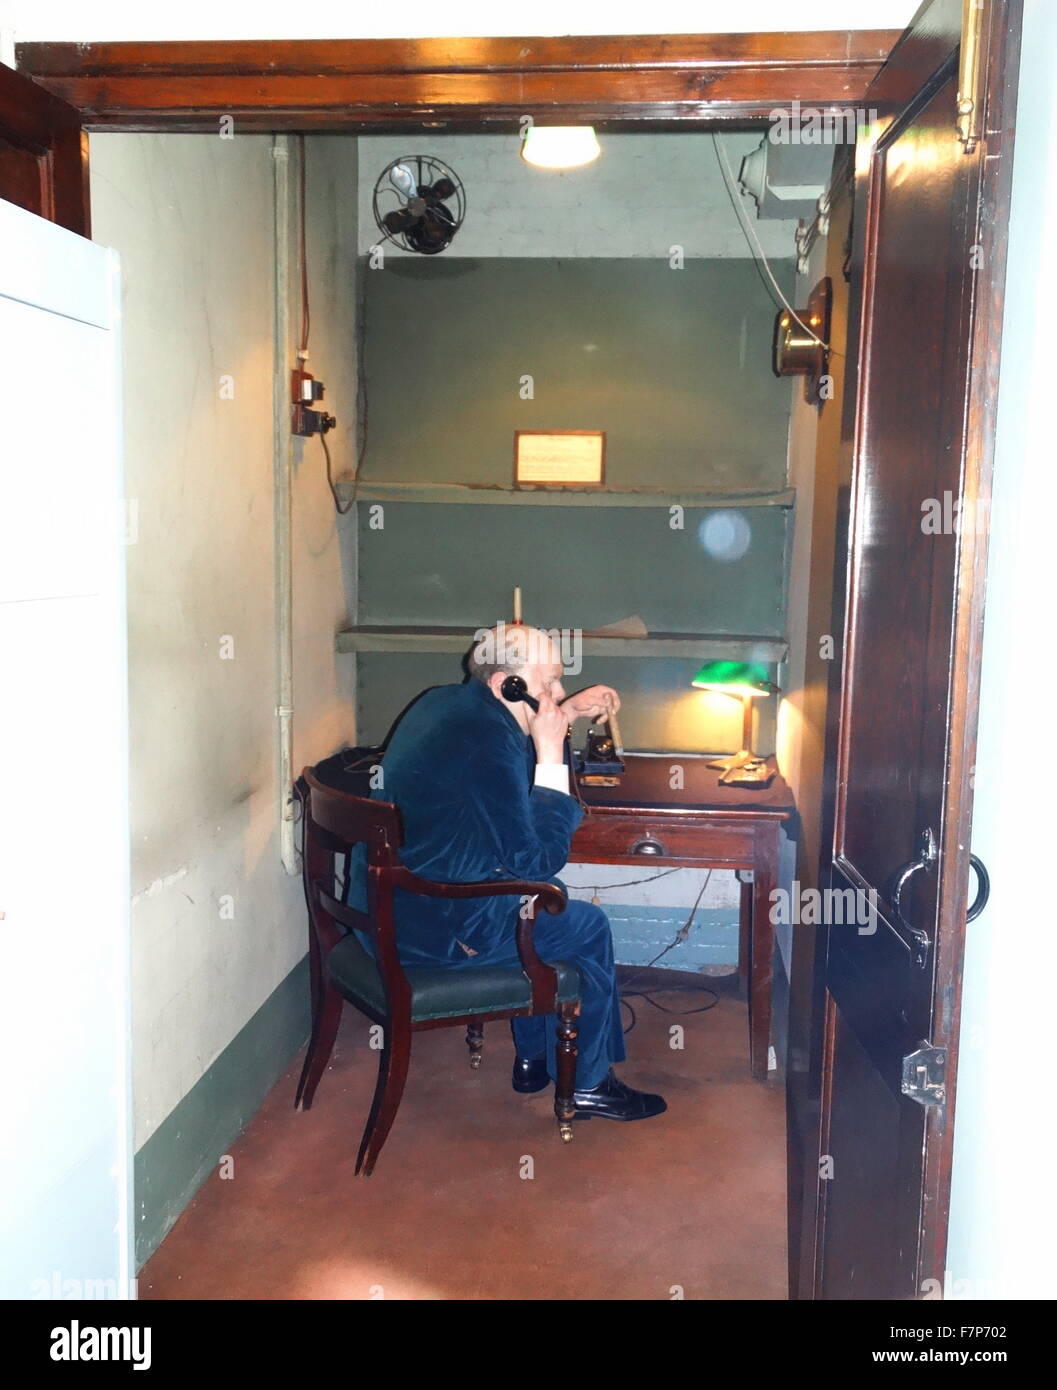 Model of Winston Churchill using a telephone in the Cabinet war rooms bunker, London; England. The War rooms were used by the British Government as protection for senior ministers during World war two. Stock Photo